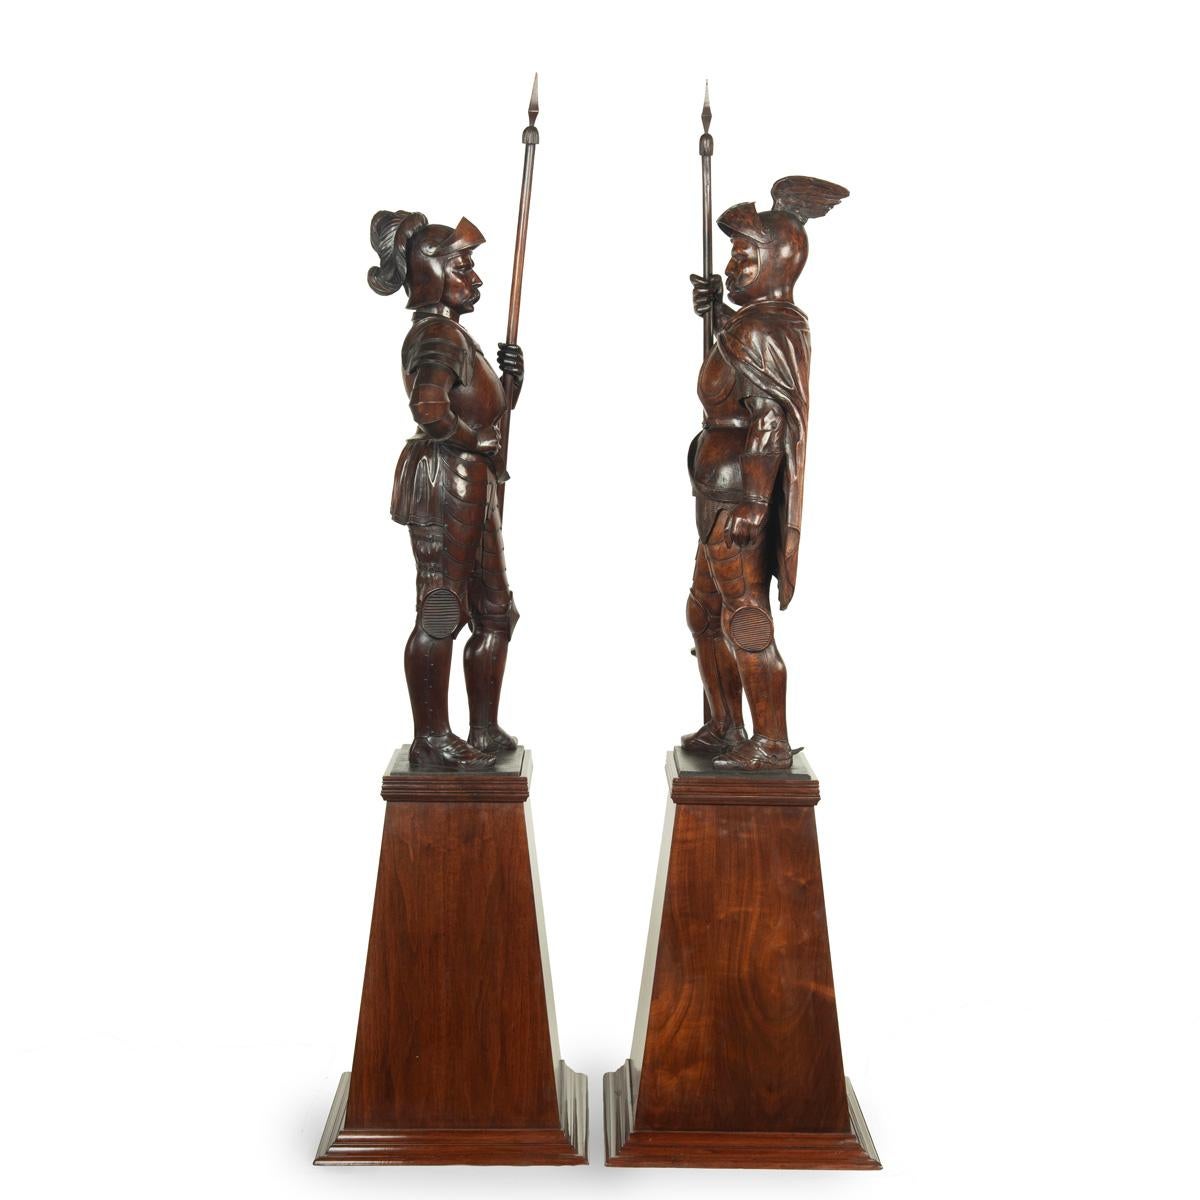 A pair of carved walnut mediaeval knights, each wearing full armour with a visored helmet metal, breastplate and holding a lance, standing on a later pyramidal base, one with curled feathers in his helmet and the other with twin ribbons, both with